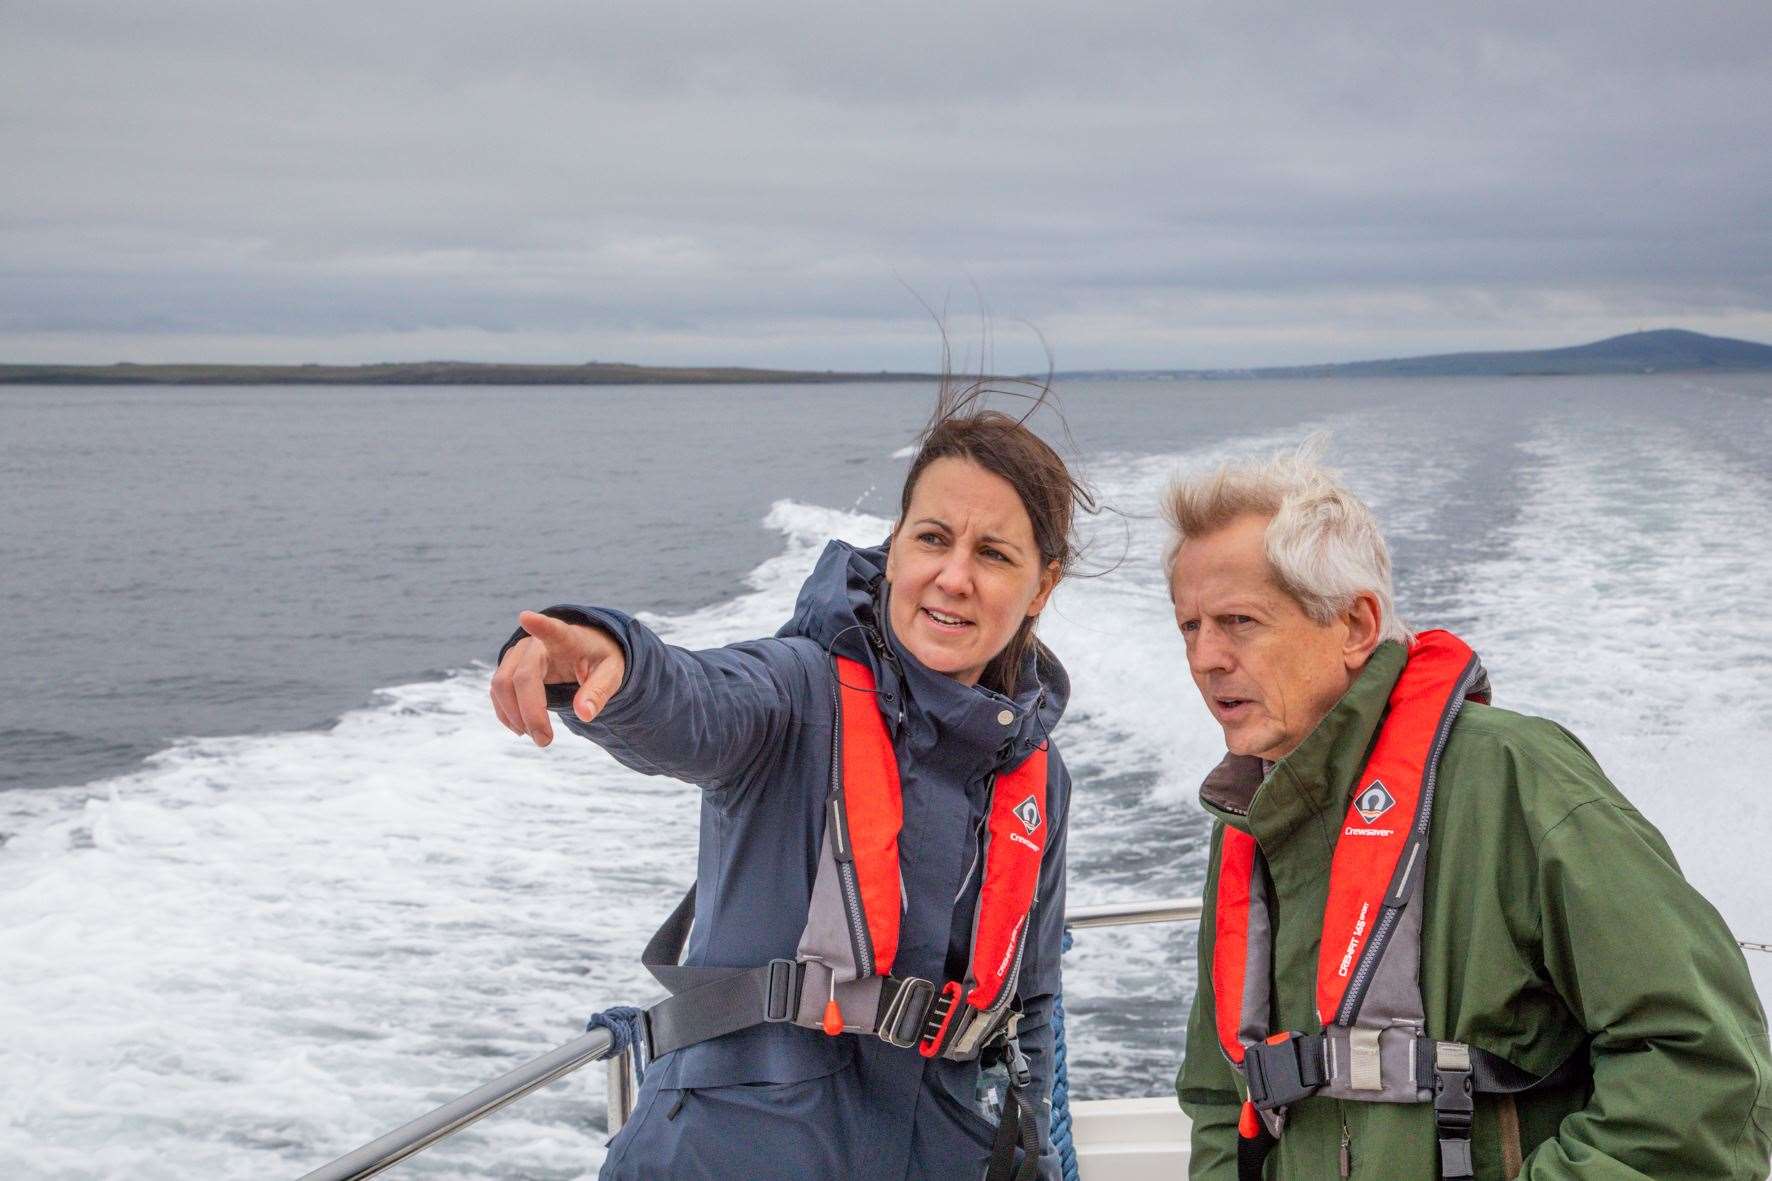 Sue Barr of the Marine Energy Council discuiing ocean energy with Richard Graham MP en route to the EMEC tidal test site.